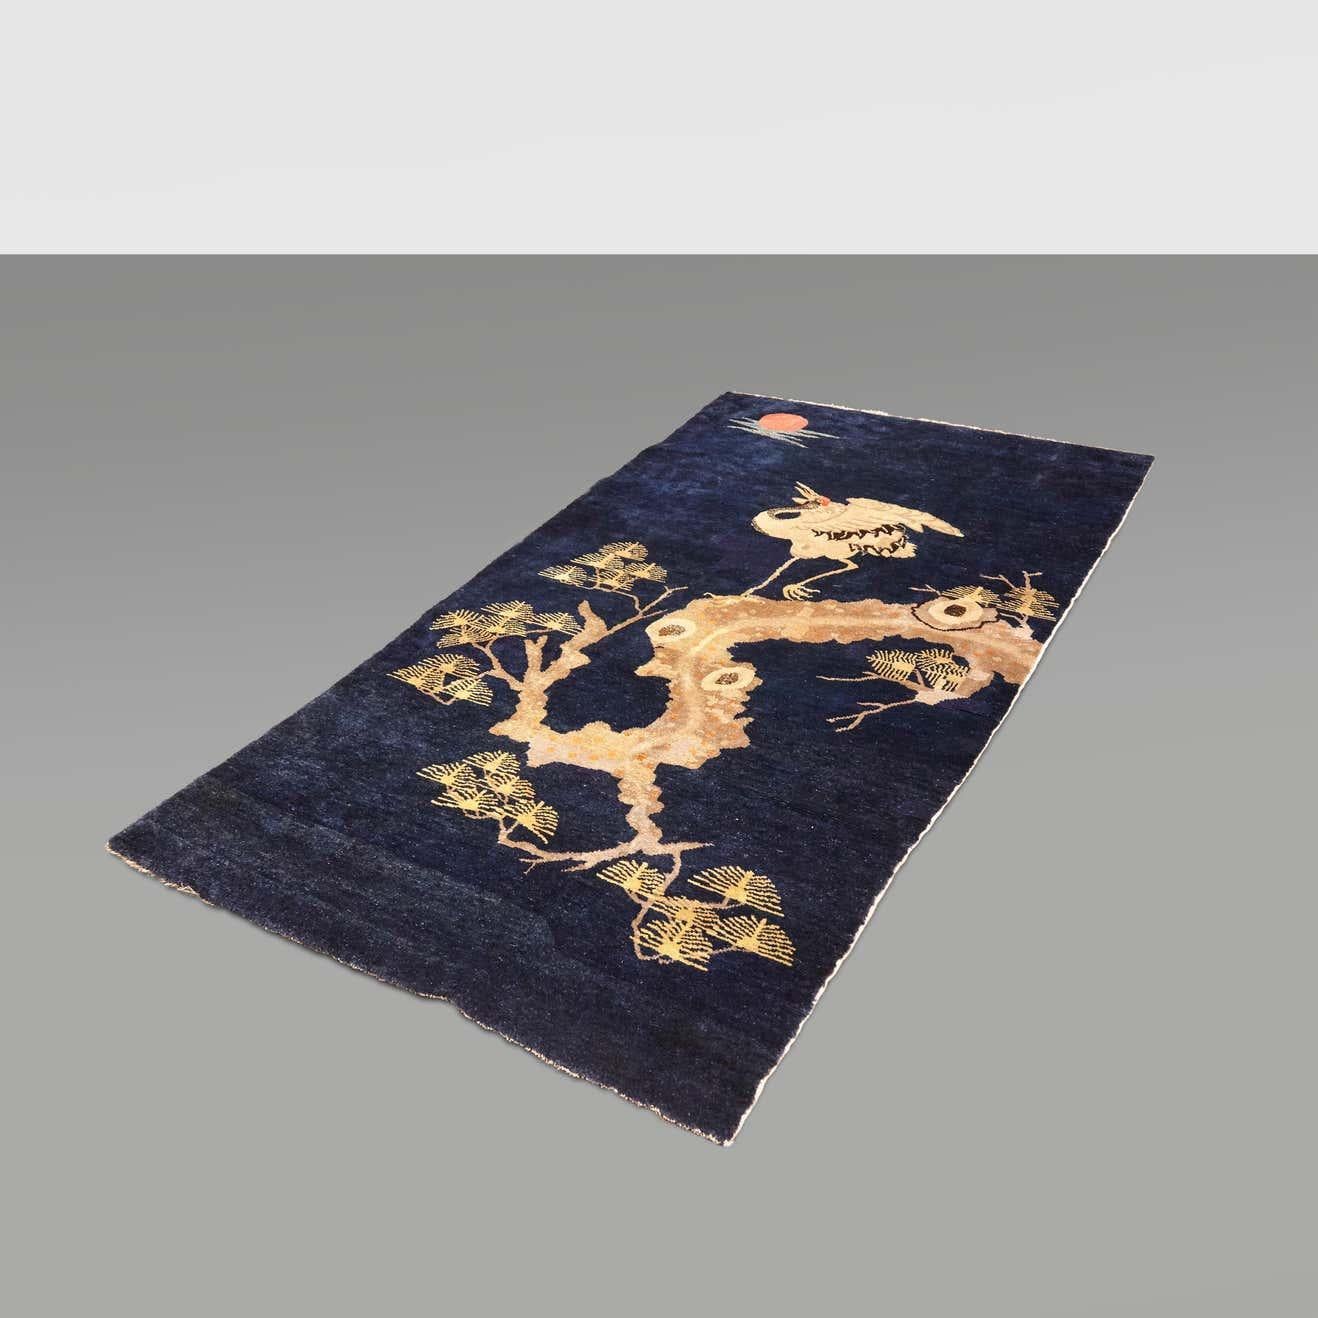 Pao Tou Crane Chinese Export Hand Knotted Wool Antique Rug, Early 20th Century For Sale 11